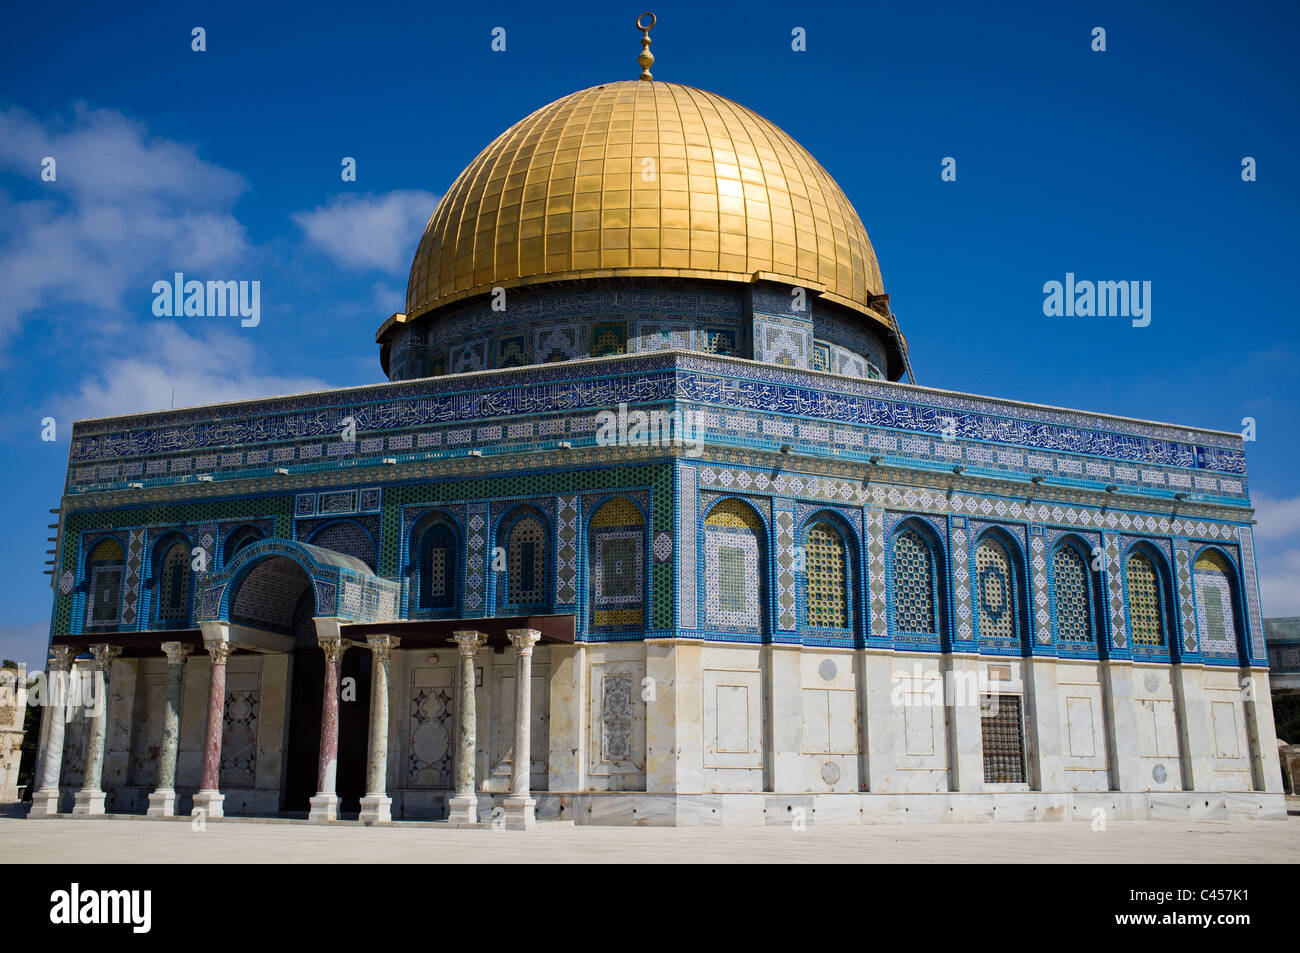 The Dome of The Rock in Al-Aqsa Mosque compound, Temple Mount. Jerusalem, Israel. 2 June 2011. Stock Photo